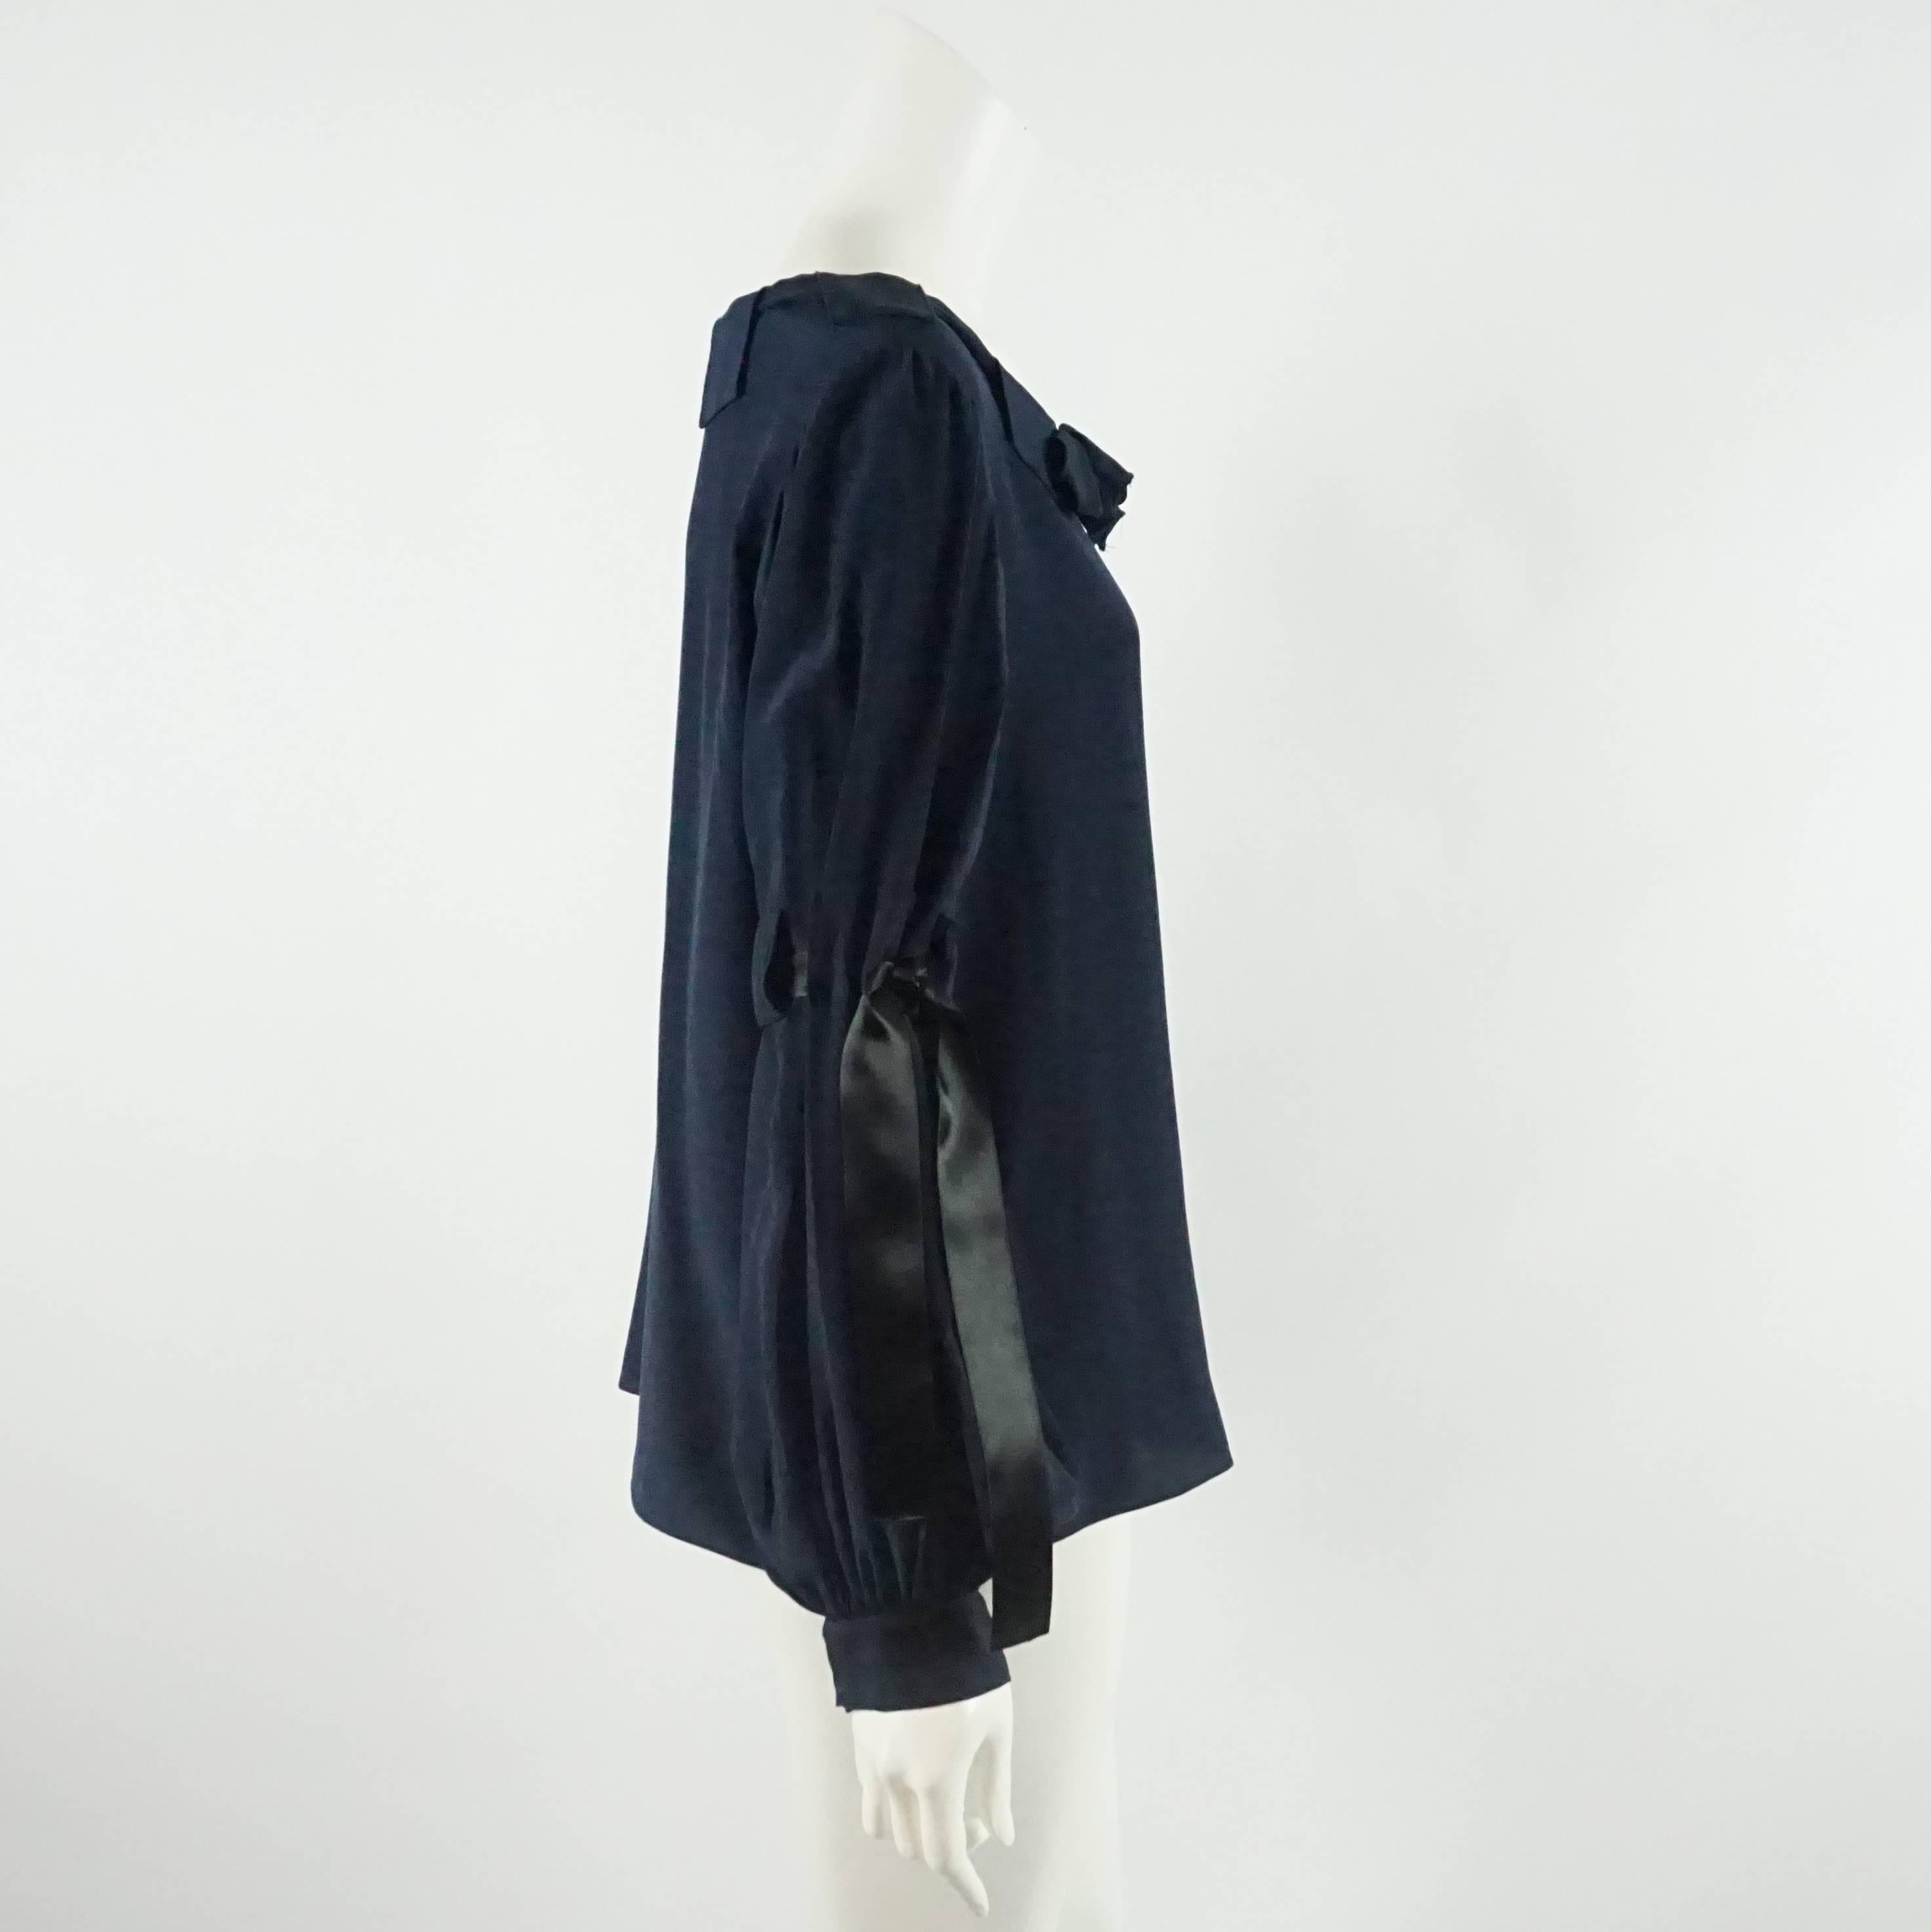 Oscar de la Renta Navy Silk Long Sleeve Top with Ties - L. This top is gorgeous with a chic style. It features a puffed sleeve with black ribbon ties. The top is in very good condition with light wear consistent with use.

Measurements
Bust: